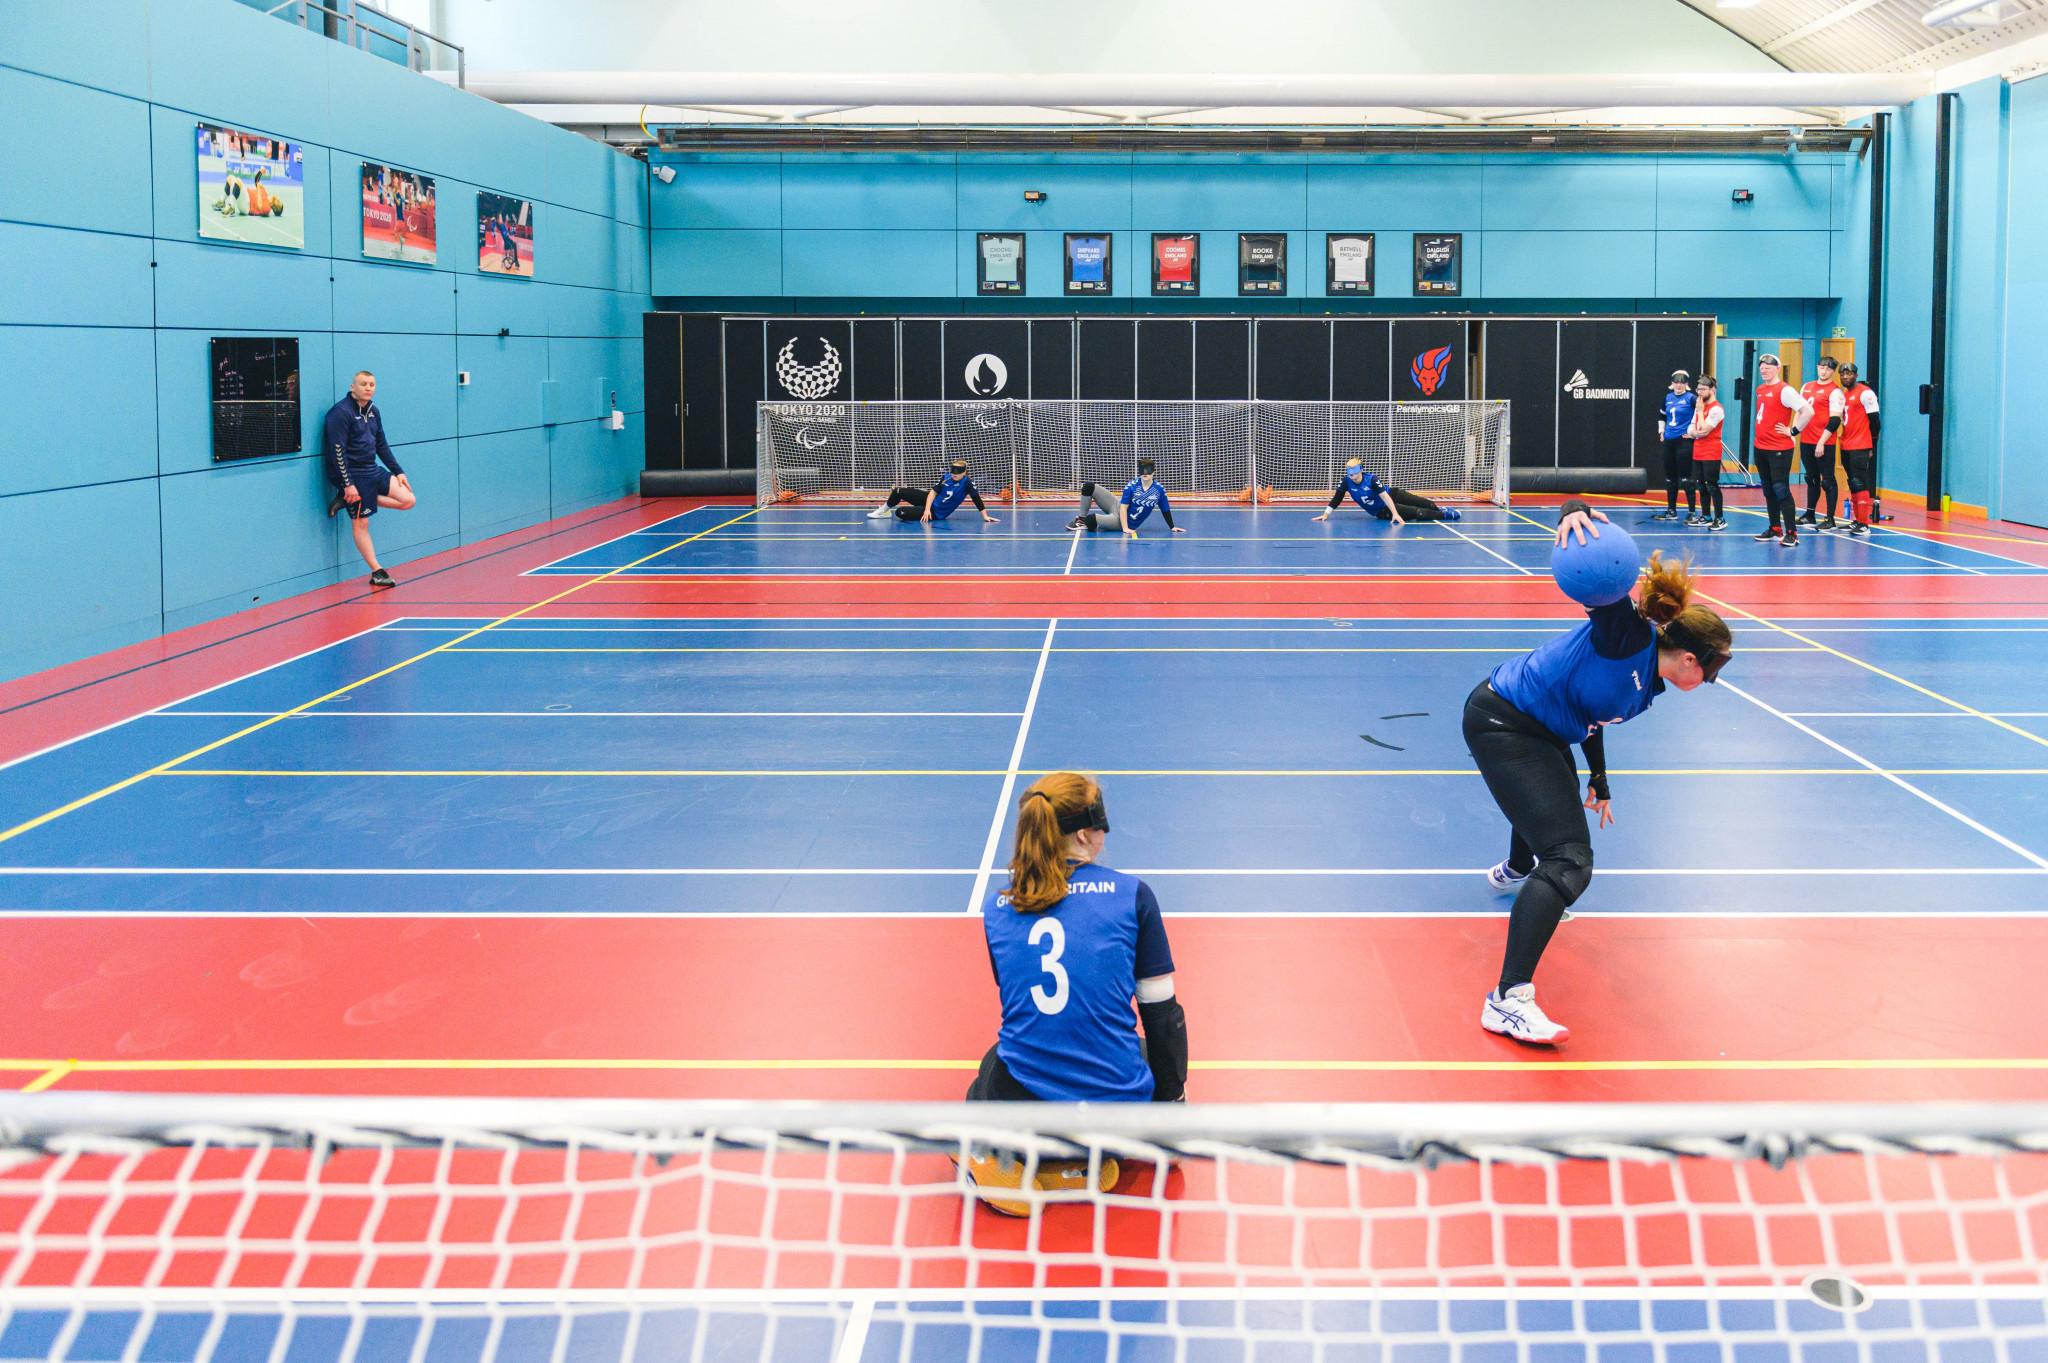 Goalball is one of 10 sports set to be contested at the IBSA World Games this August ©Goalball UK